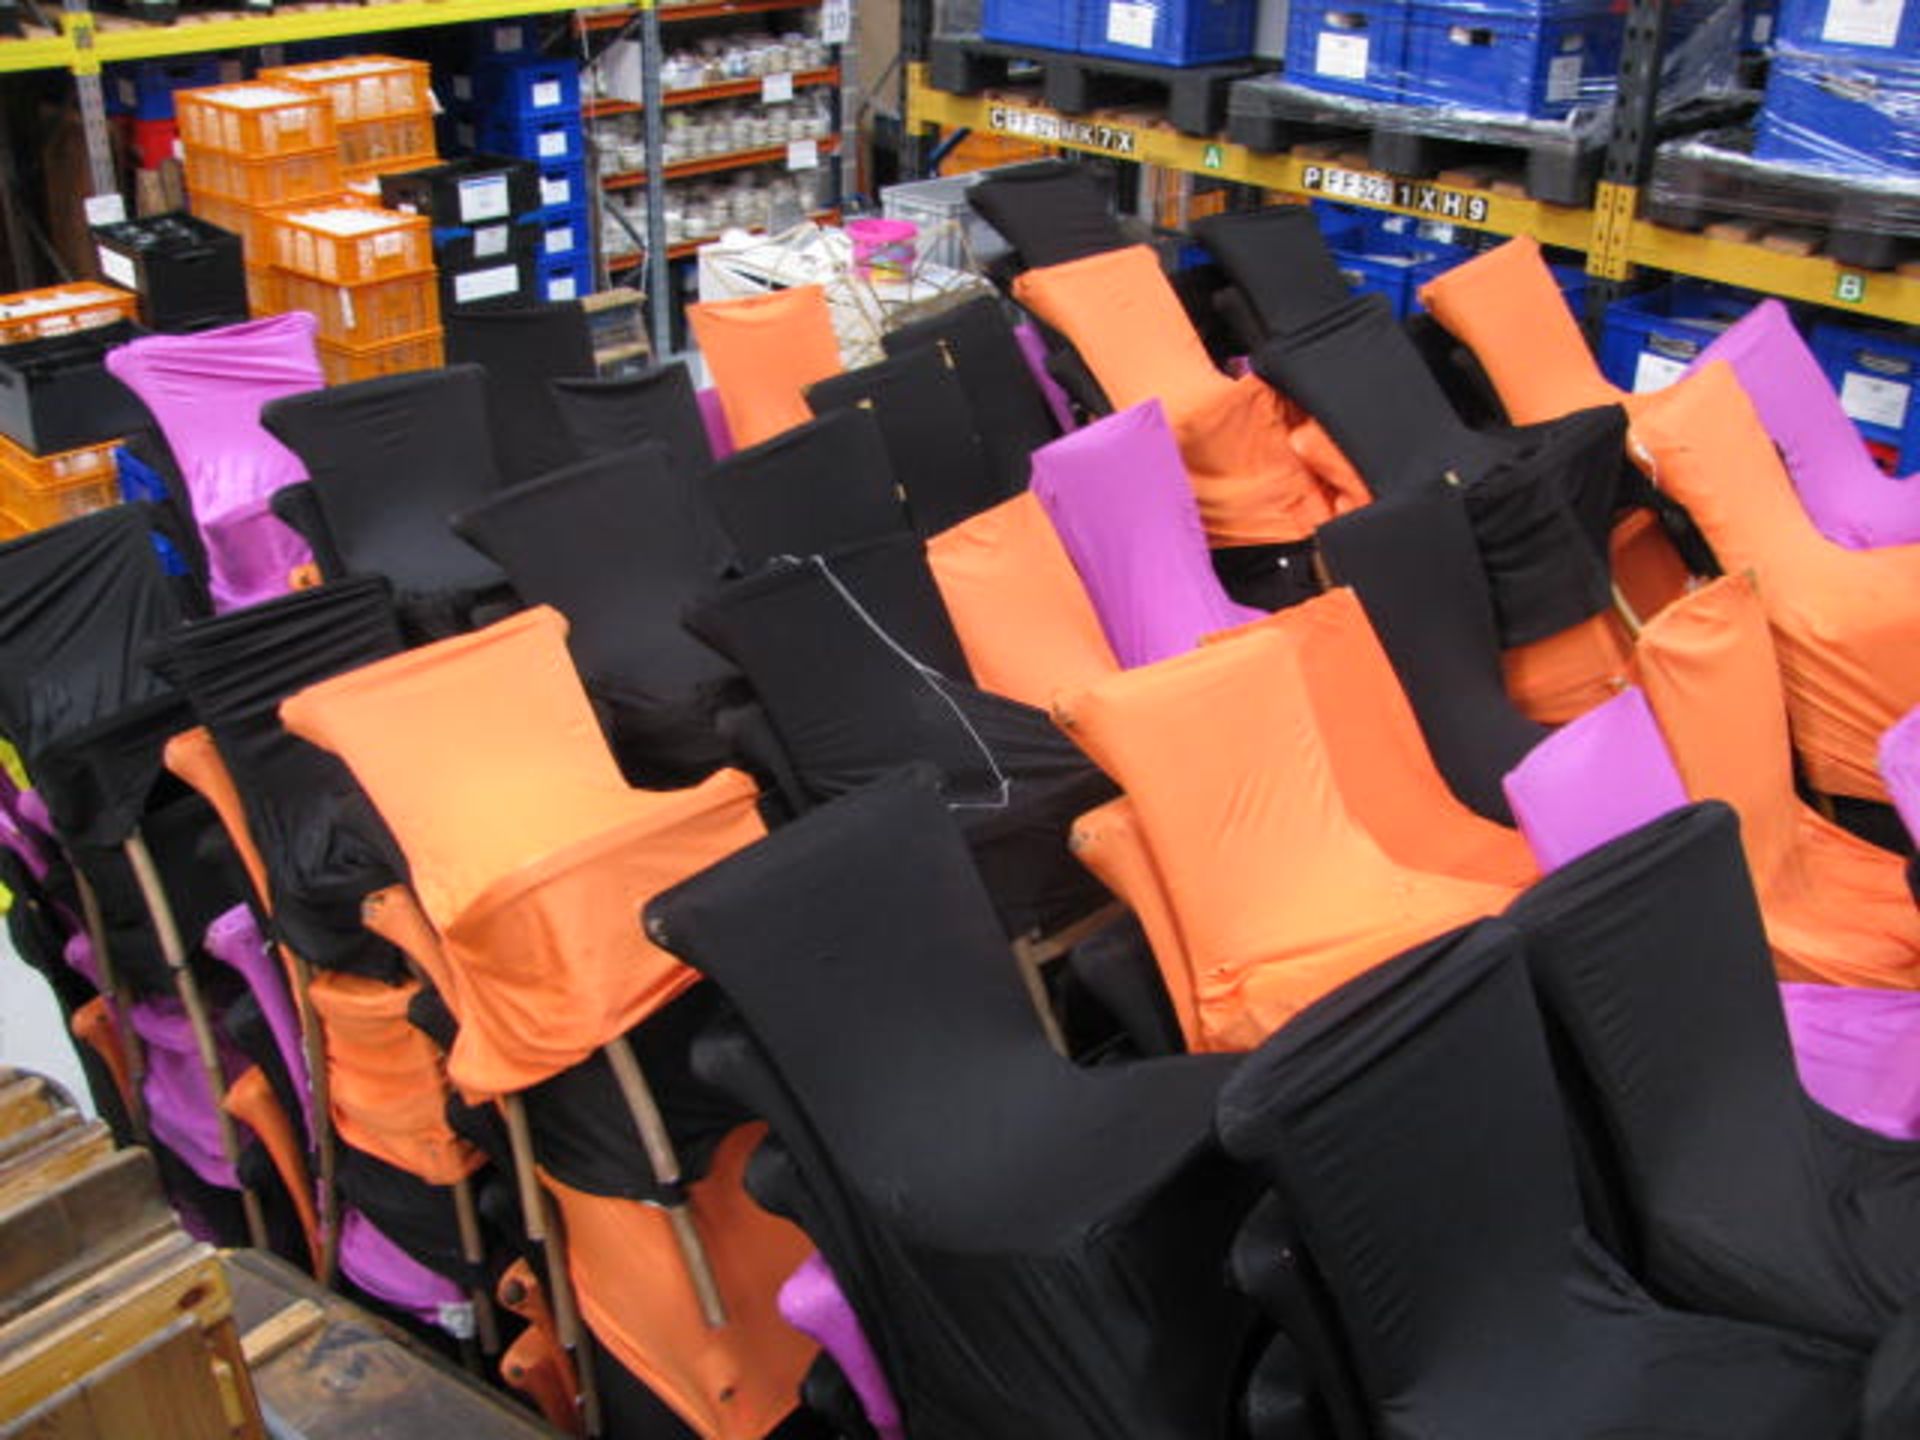 Quantity of steel framed stacking chairs, approximately 400